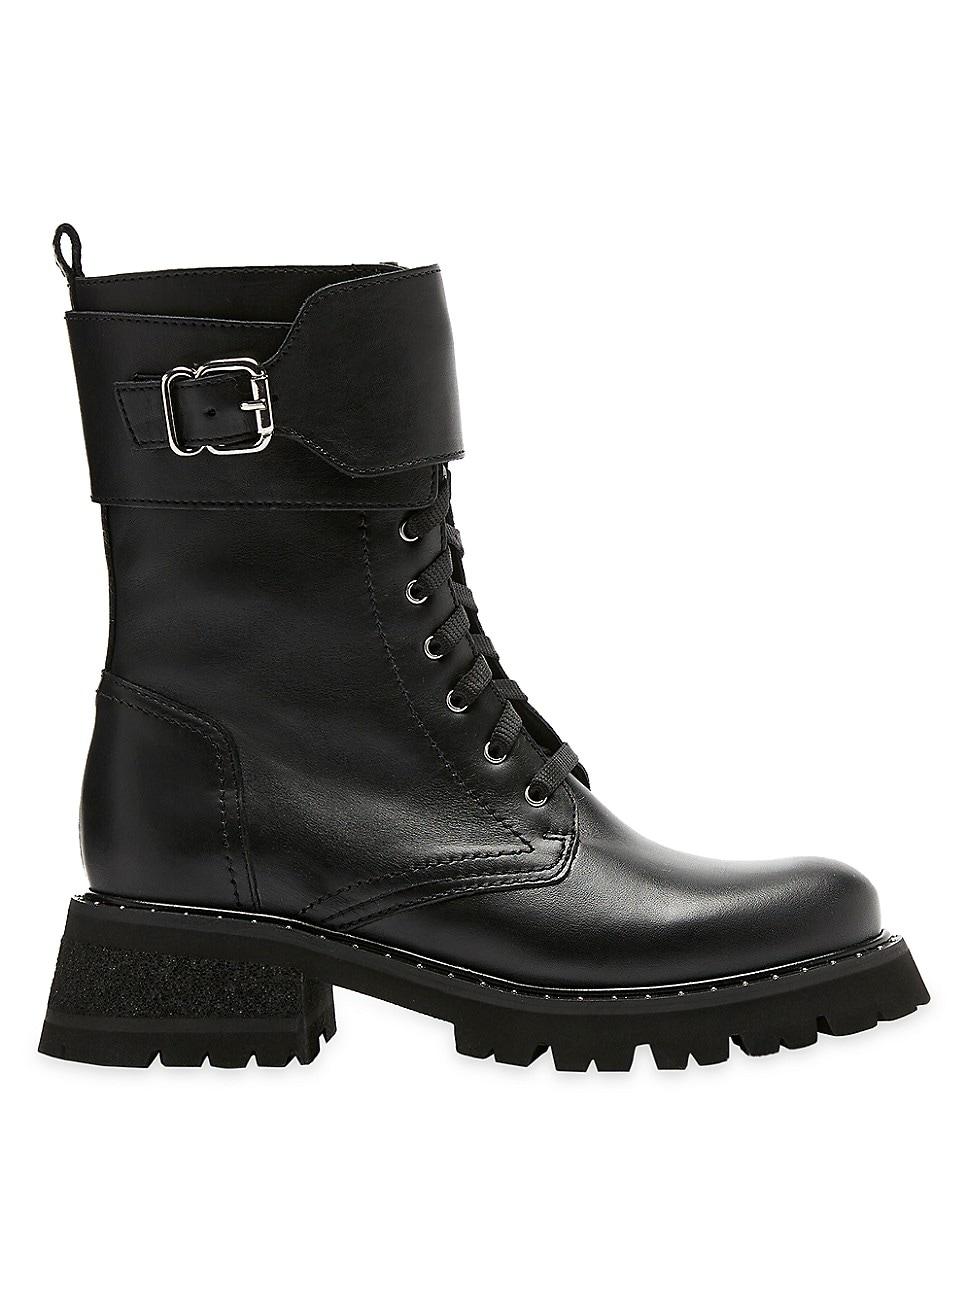 La Canadienne Cody Lug-sole Leather Combat Boots in Black | Lyst